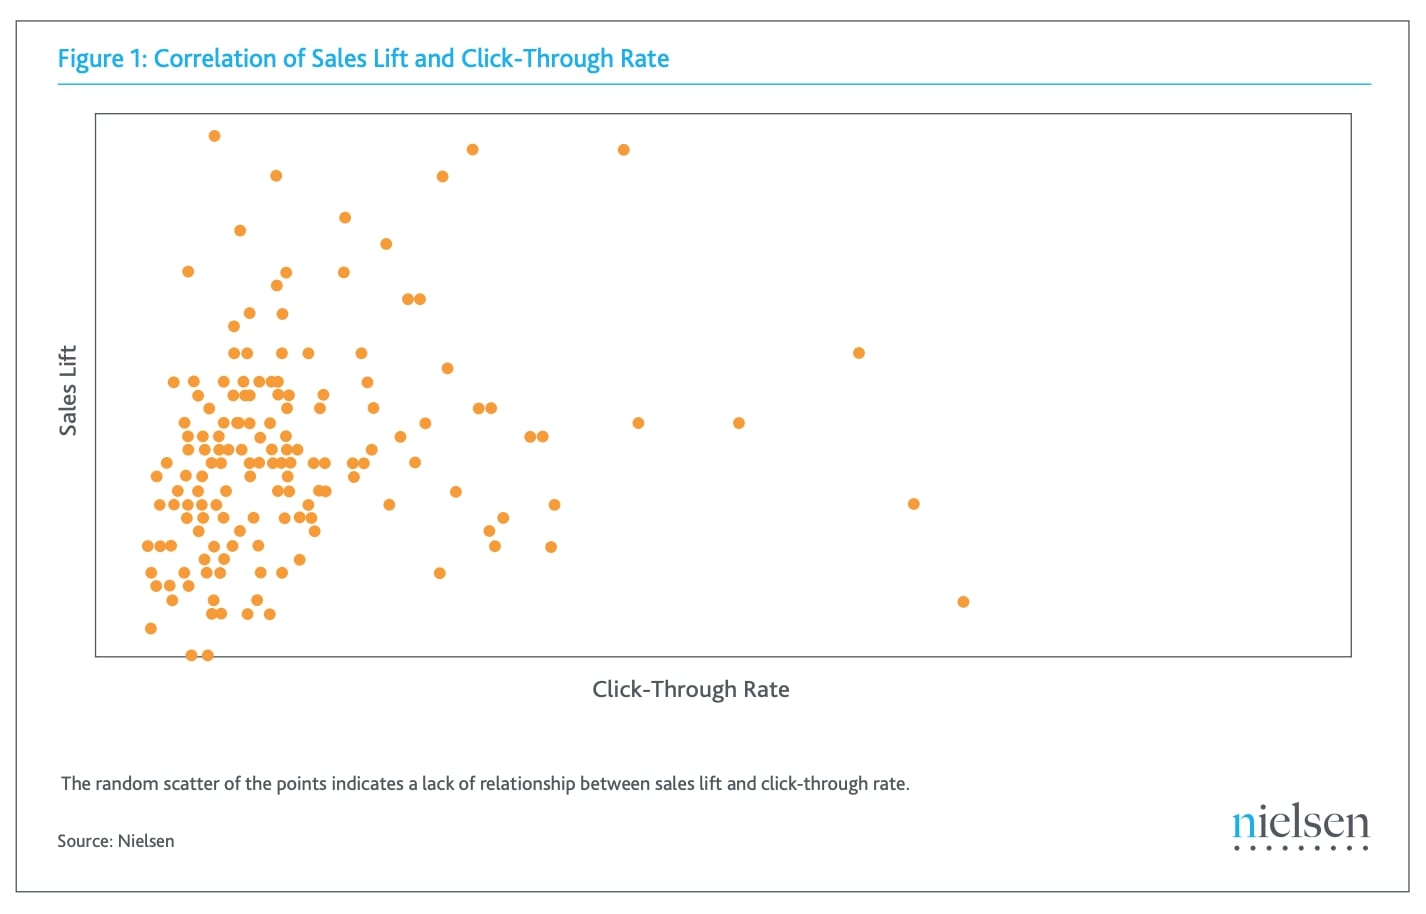 Correlation of Sales Lift and Click-Through Rate